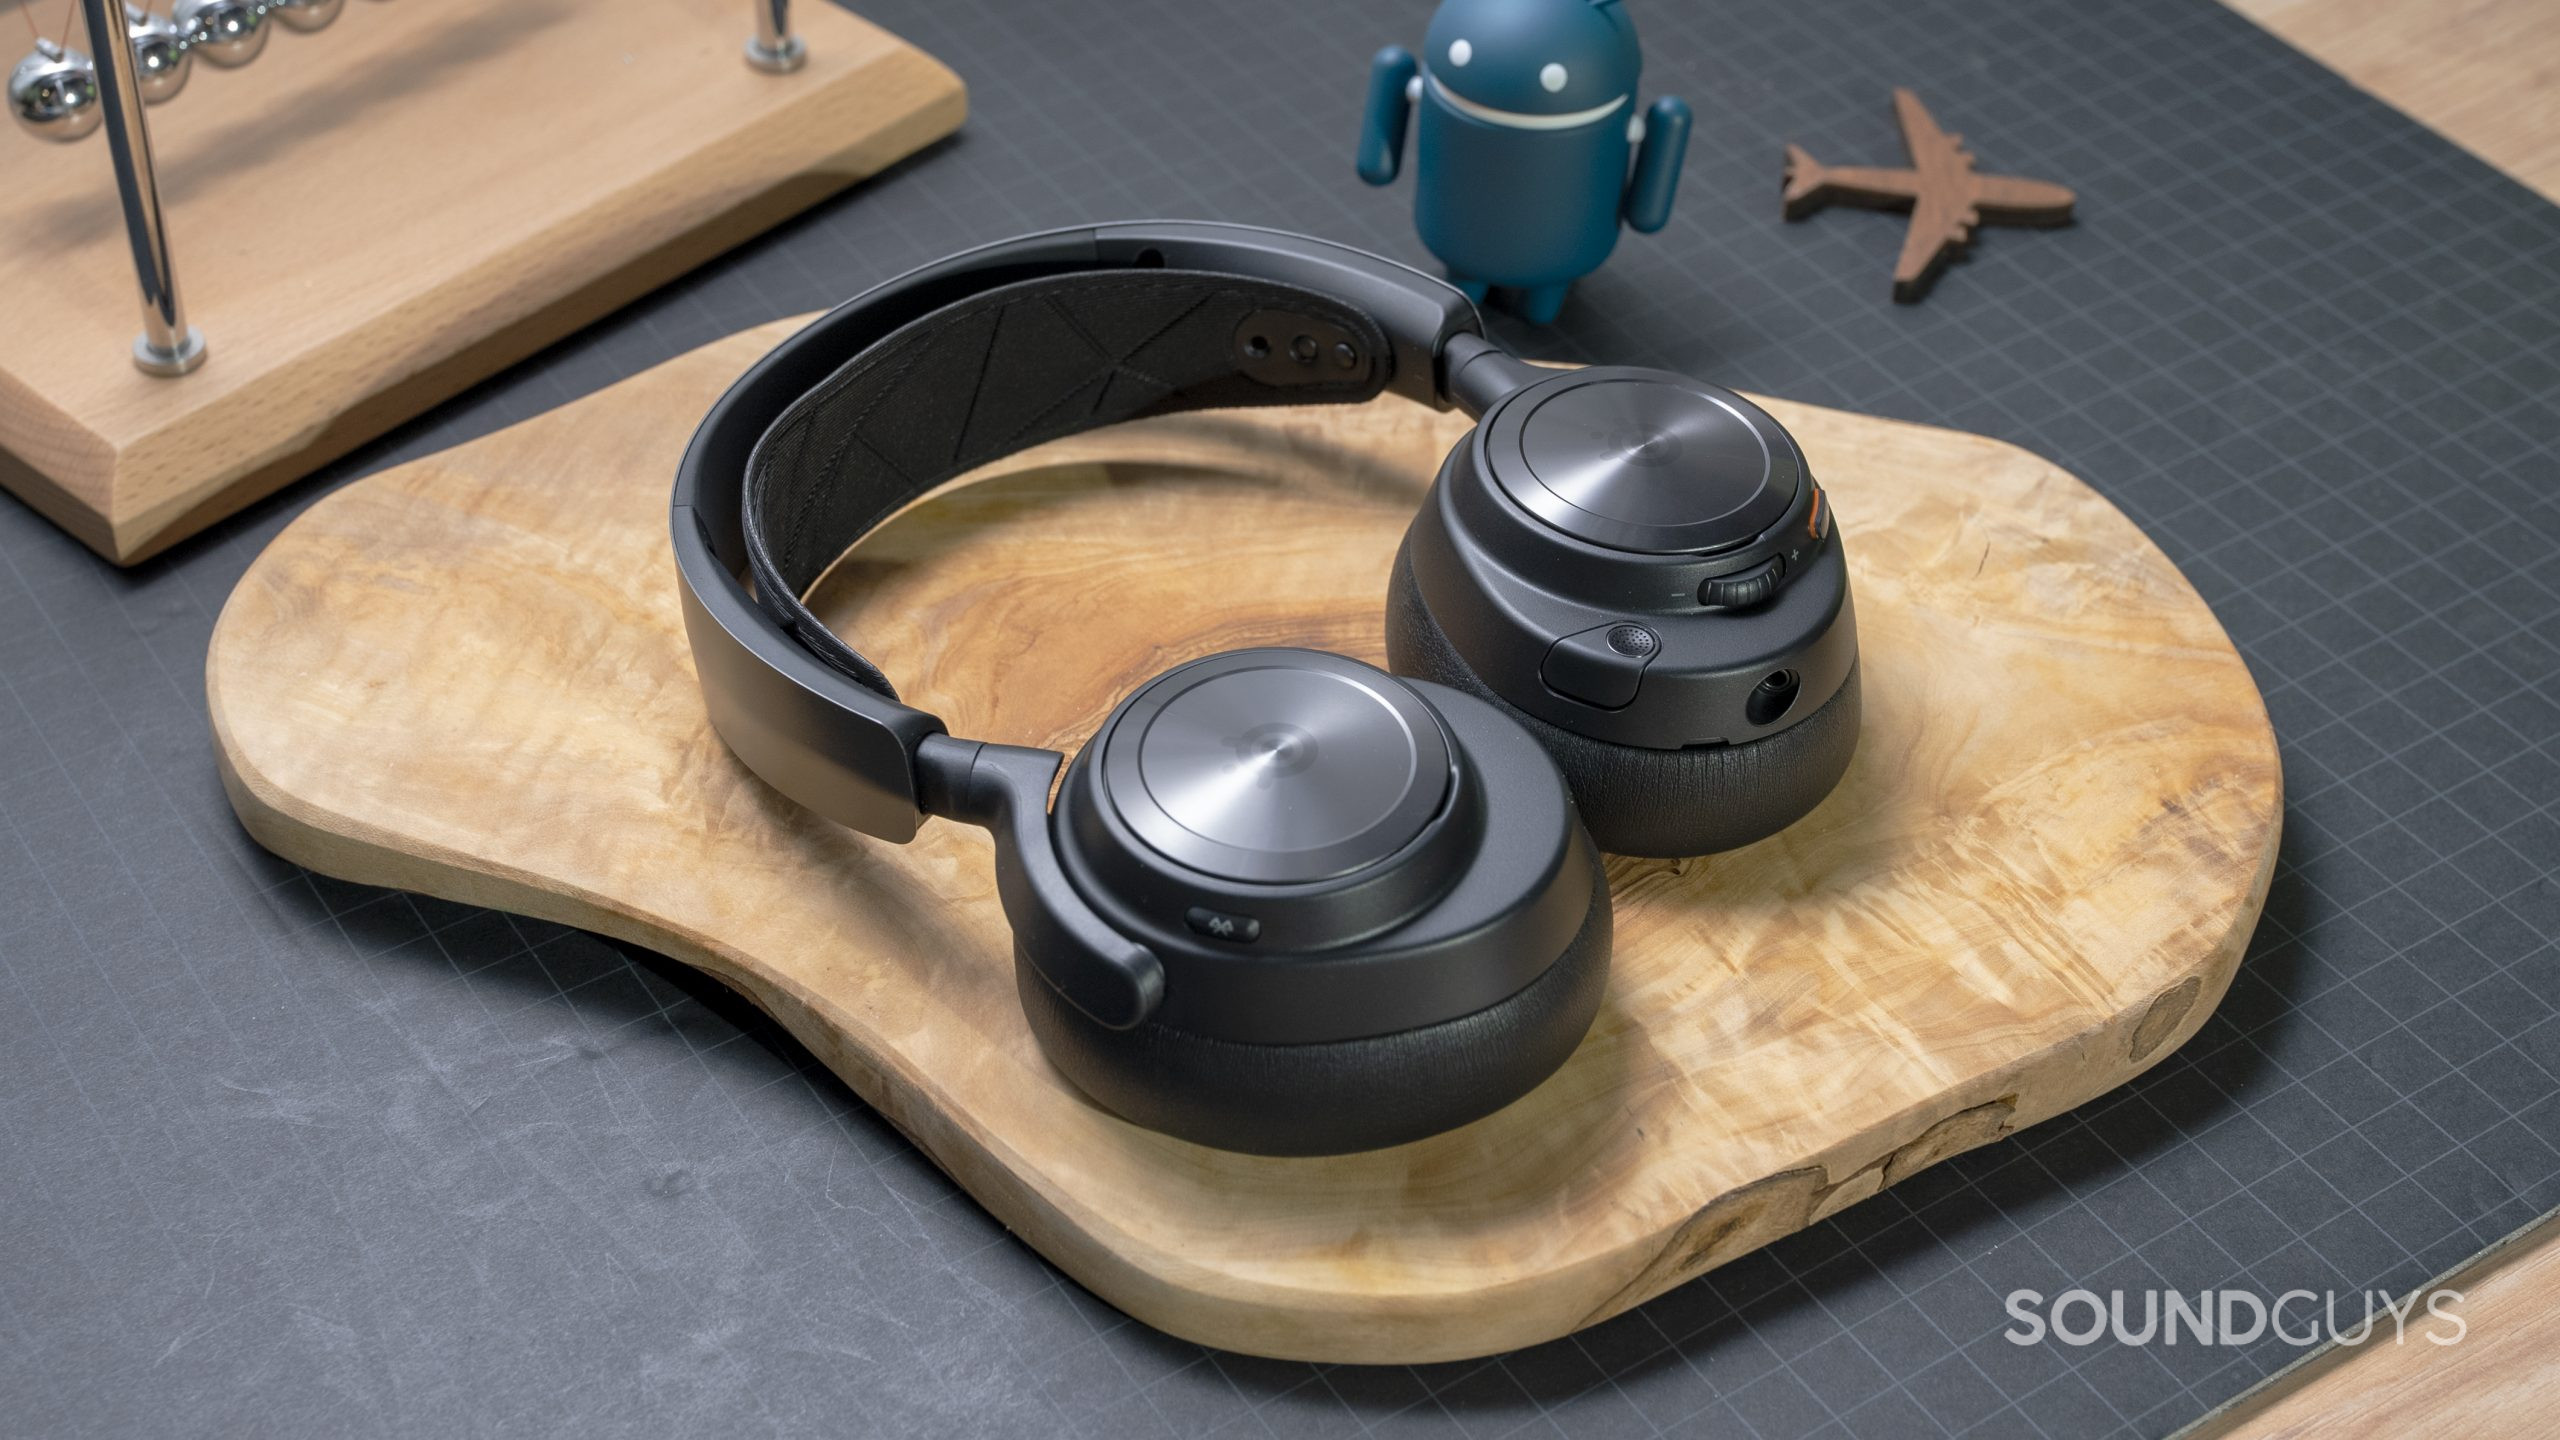 The SteelSeries Arctis Nova Pro Wireless laid flat on a wooden board atop a grey surface.